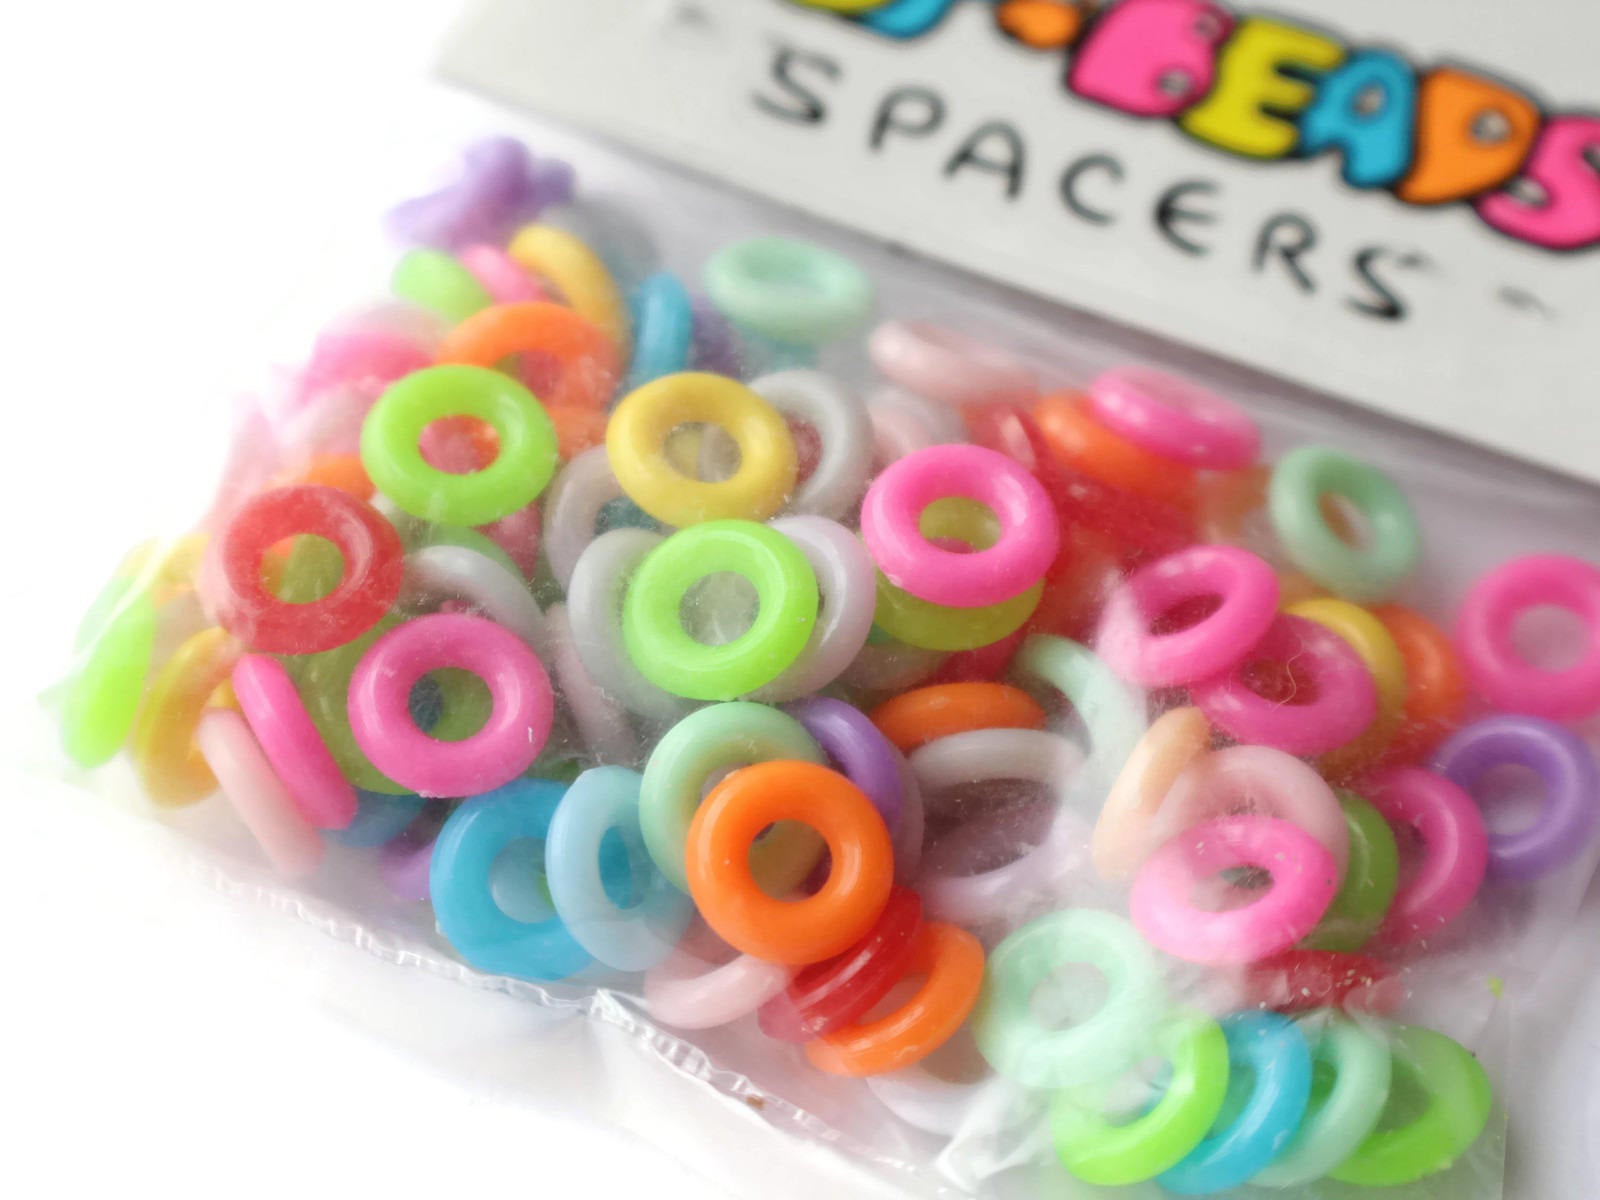 Rubber O-Rings, Rubber Bead Spacers